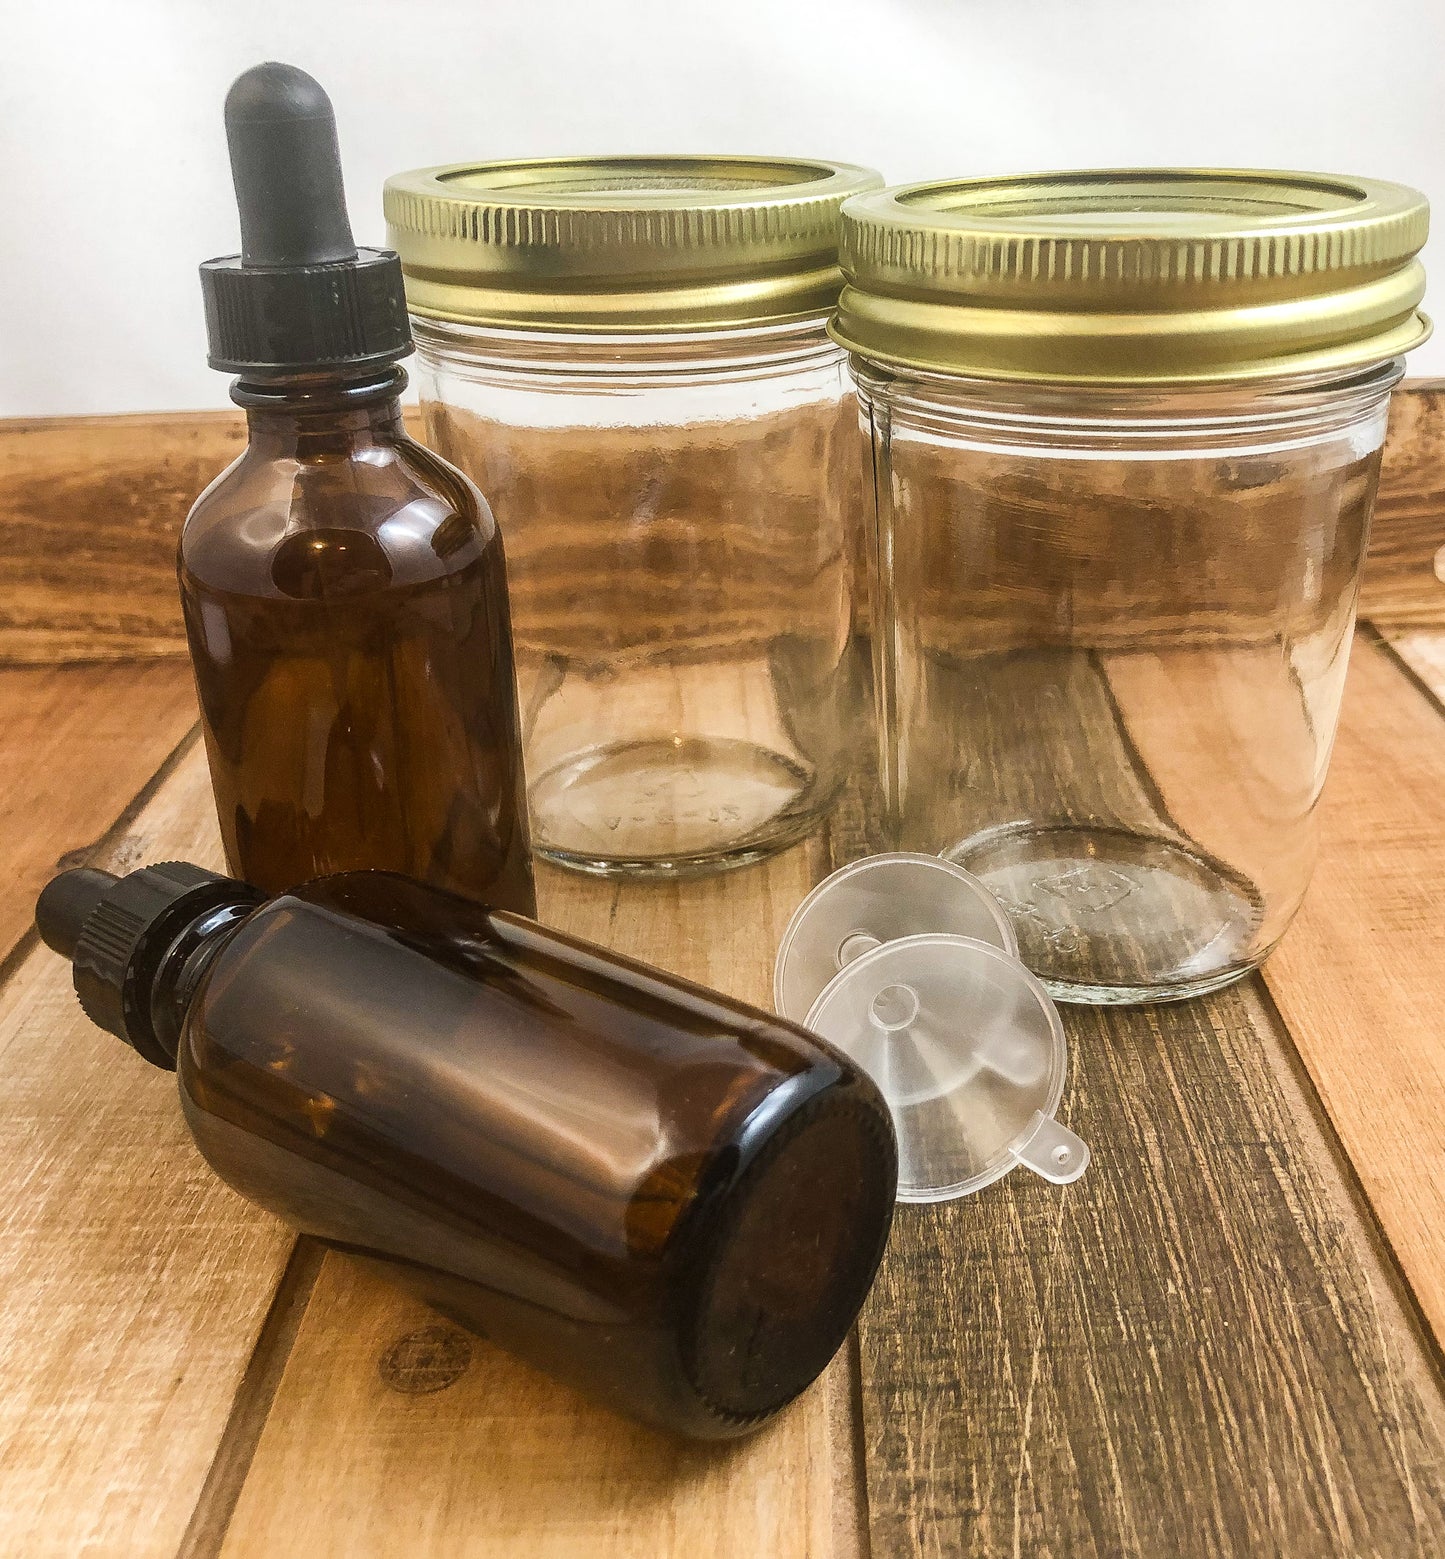 2 mason jars, 2 amber dropper bottles, 2 plastic funnels on wooden table with white background